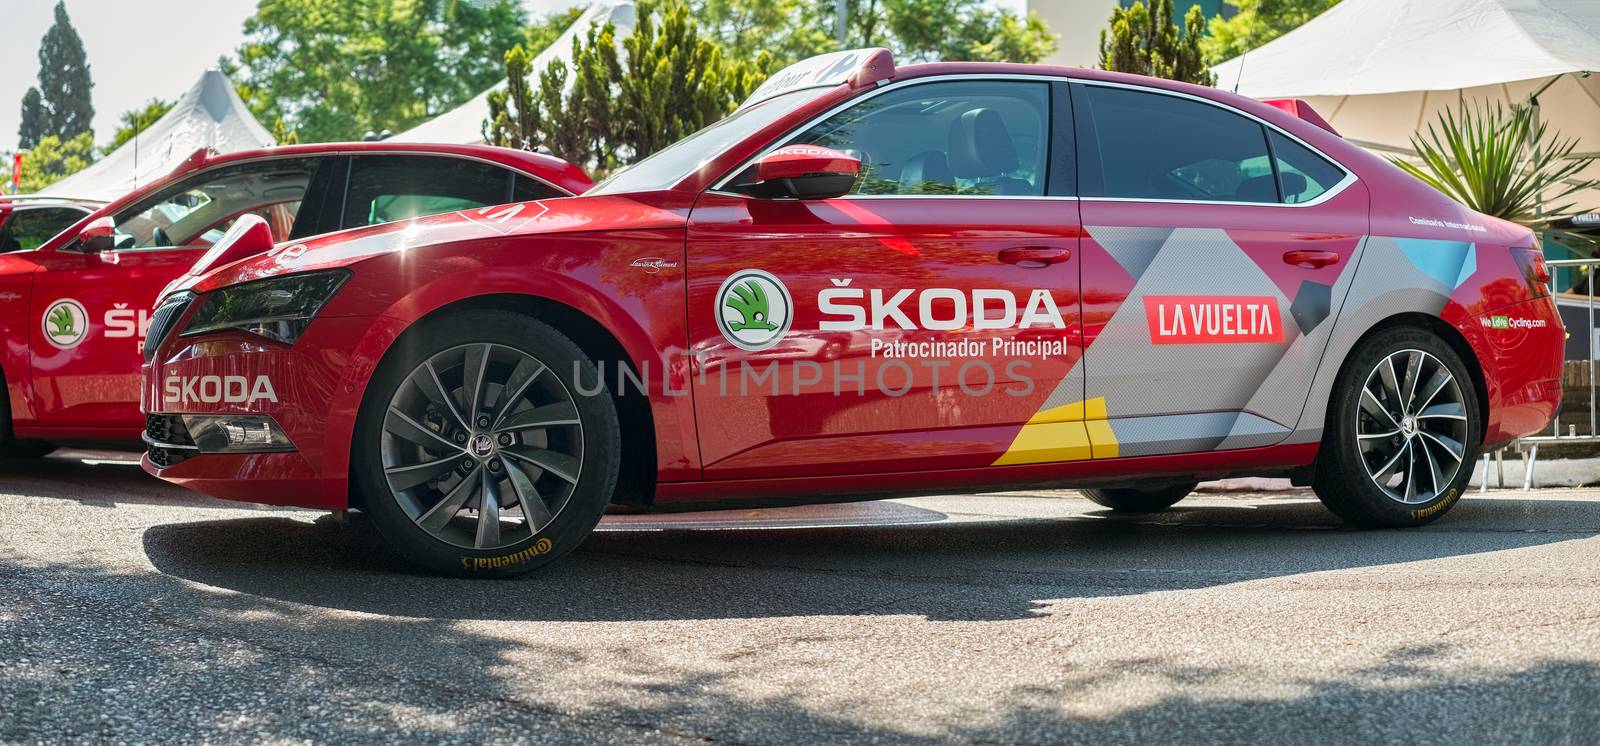 he SKODA advertisement cars parked at the start of the Vuelta de by Roberto